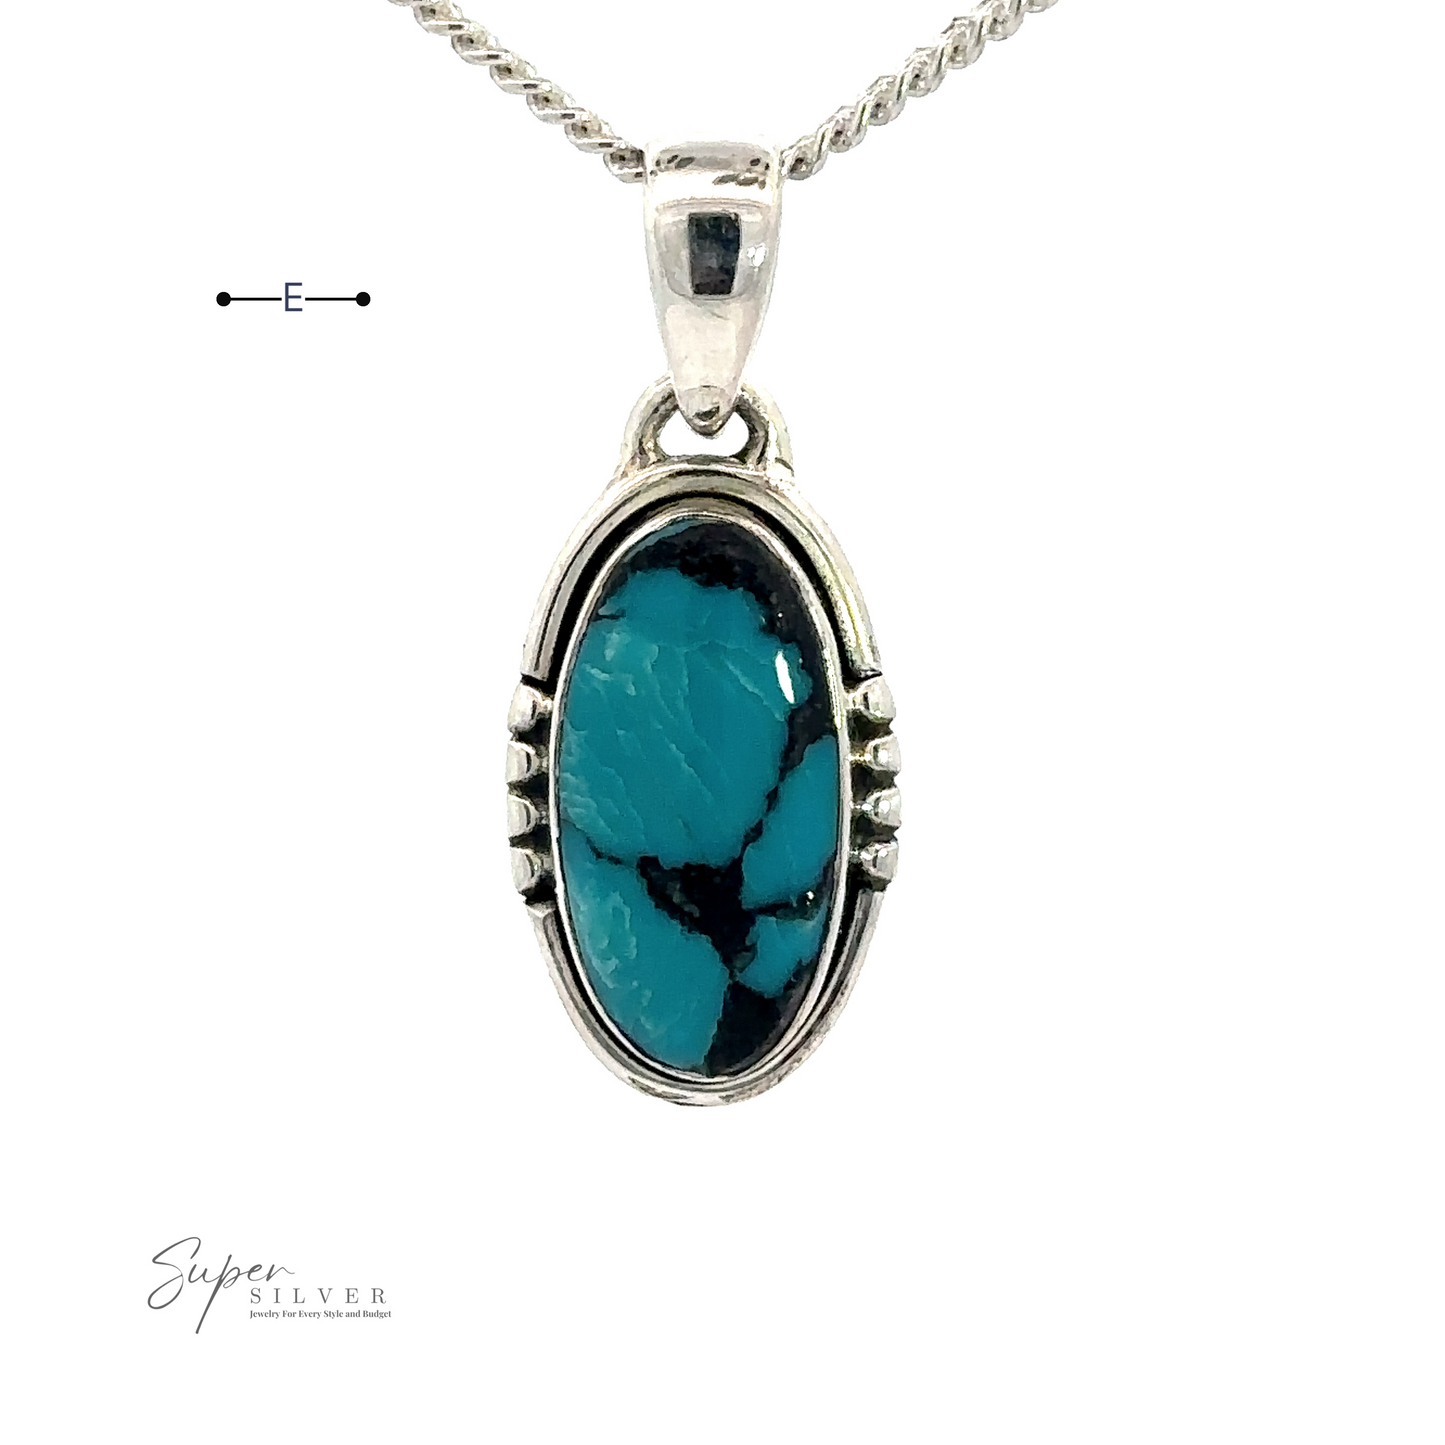 
                  
                    A Natural Turquoise Elongated Oval Pendant featuring a natural turquoise stone with black veining. The intricately designed .925 sterling silver pendant includes small, decorative details on its sides. Super Silver logo is visible at the bottom left.
                  
                